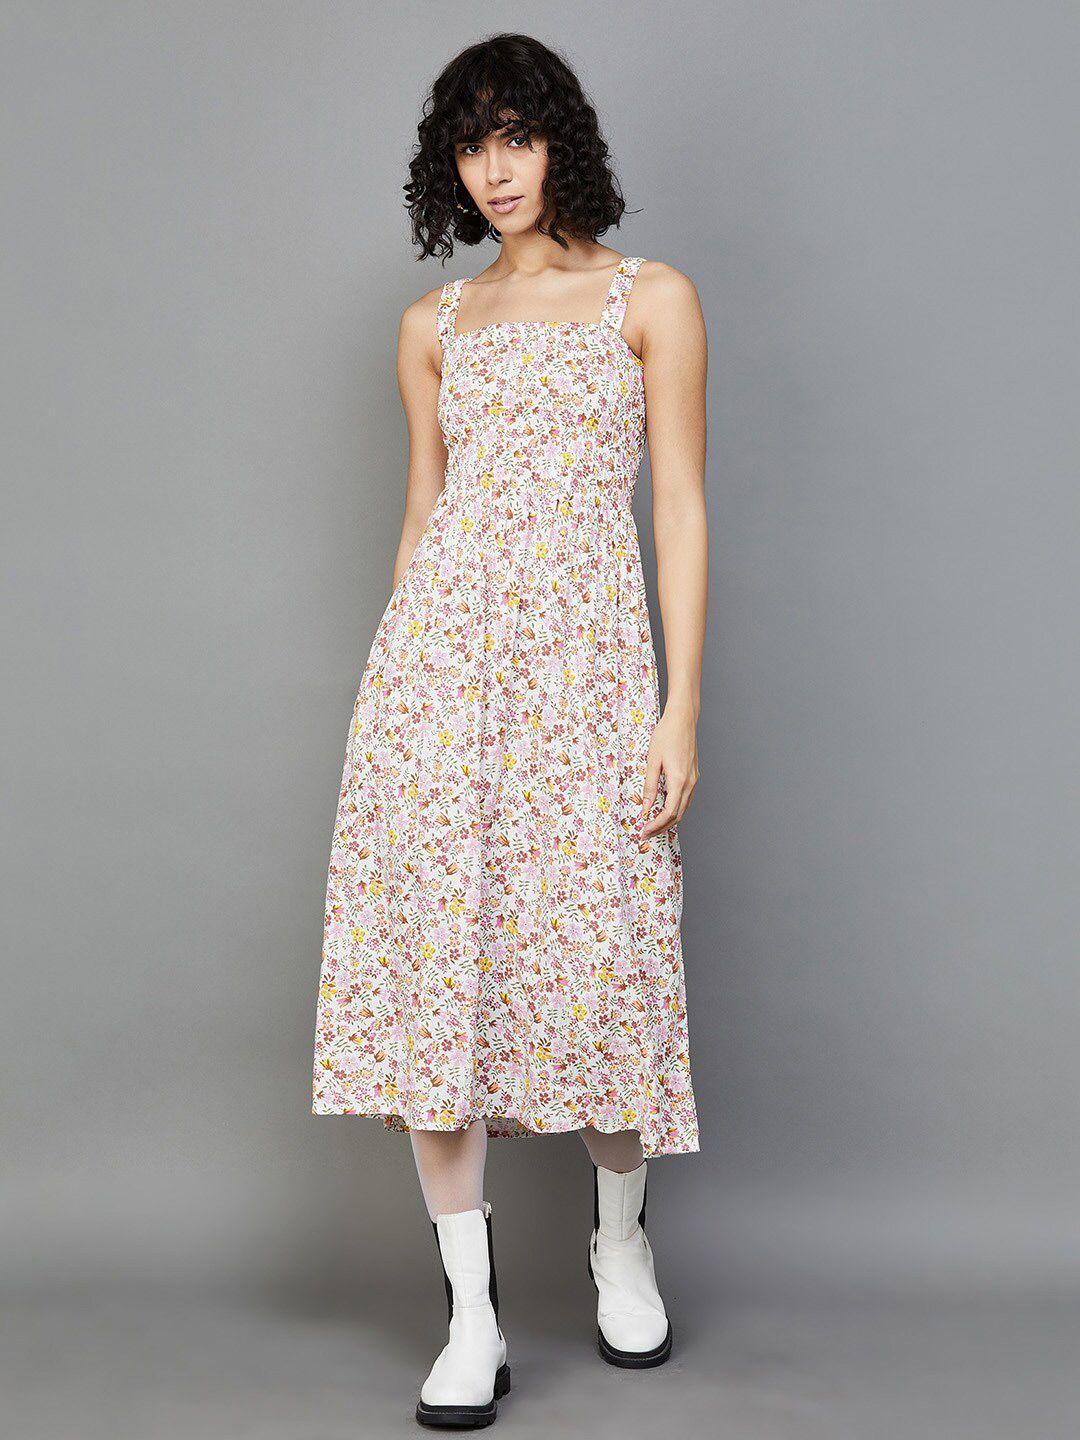 ginger-by-lifestyle-floral-printed-smocked-a-line-midi-dress